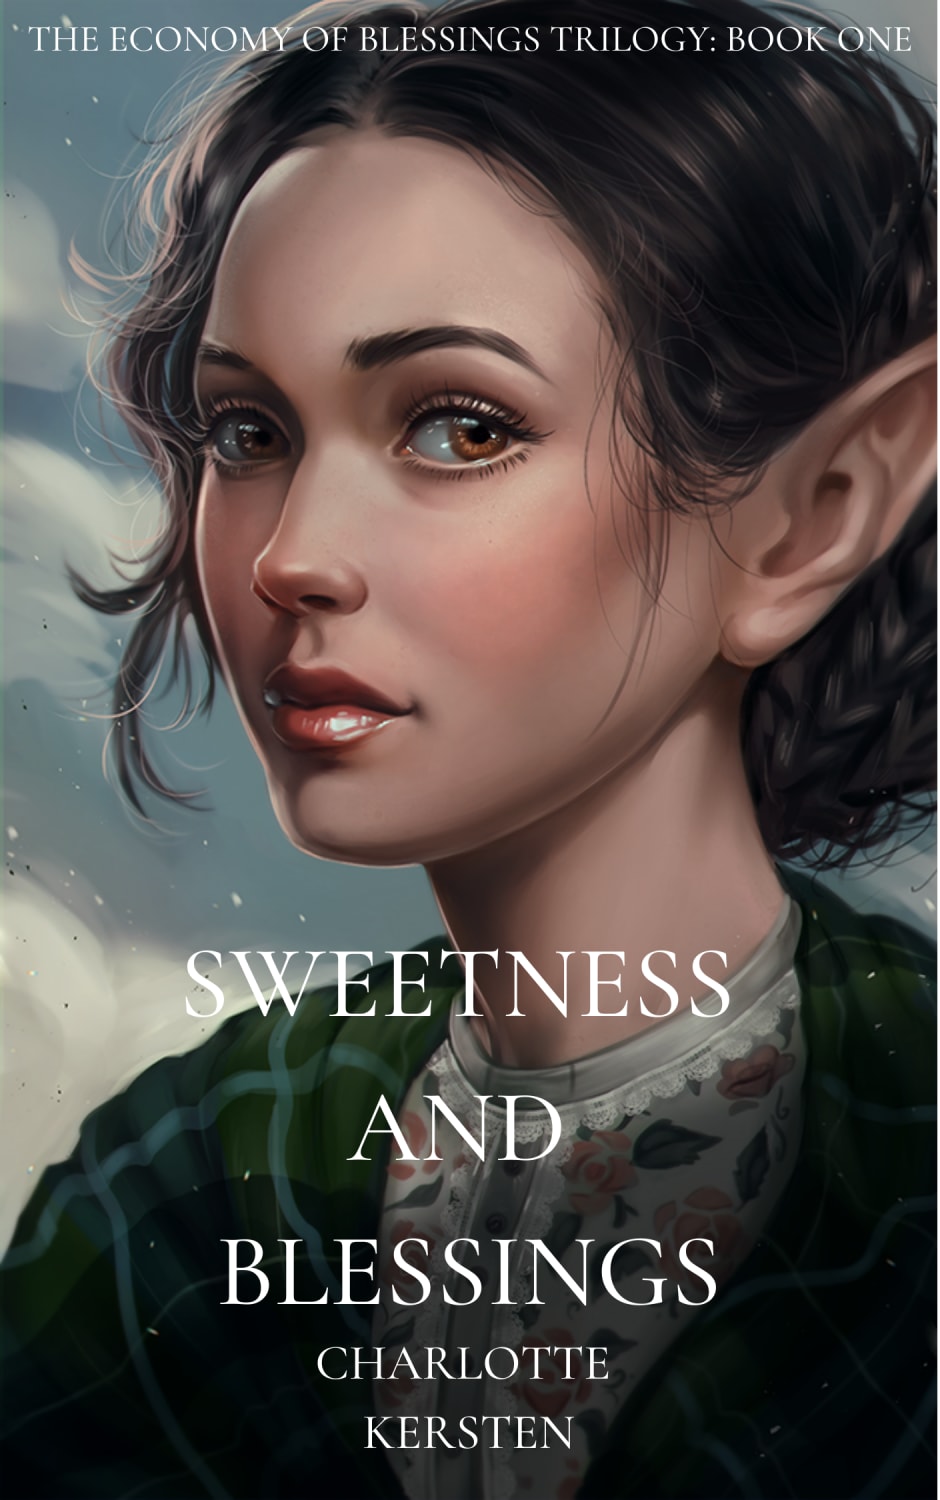 My indie debut Sweetness and Blessings is out today! I’m giving away five eBook copies, and all of my proceeds from the book will be donated to causes that are associated with the book's themes